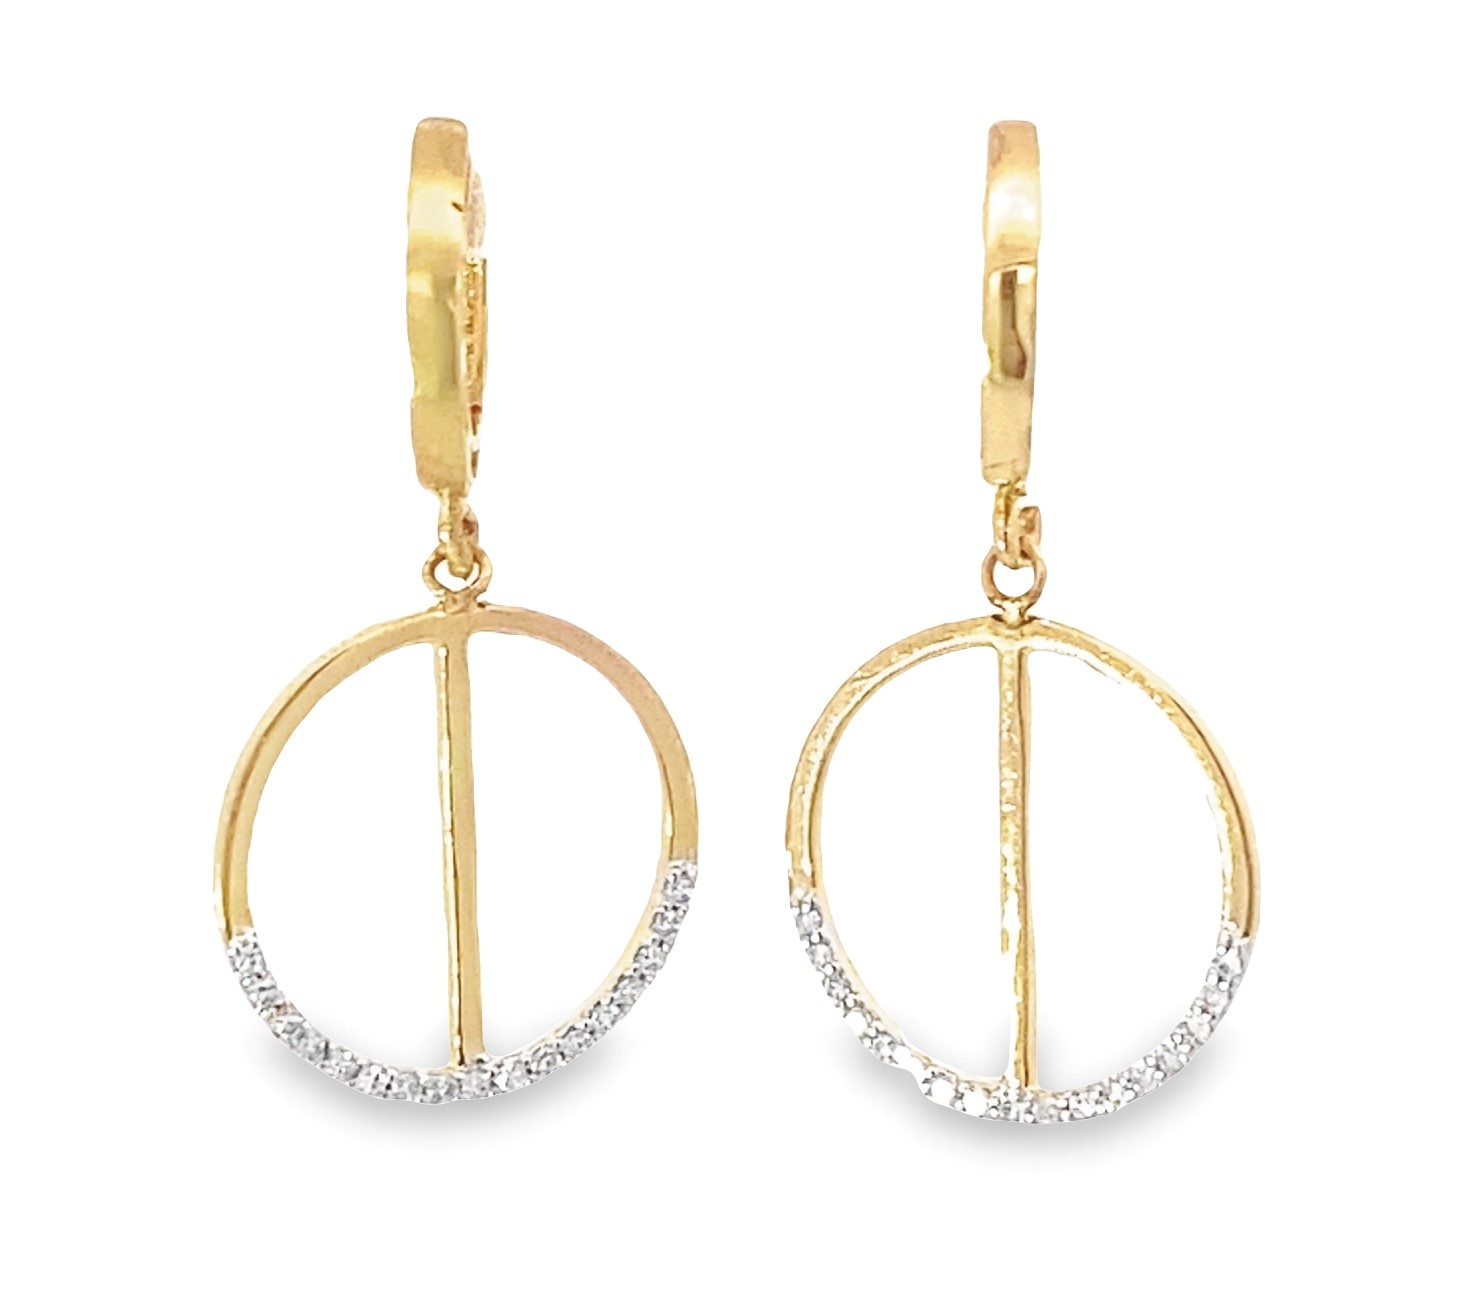 Estate 14 Karat Yellow Gold Diamond Dangle Earrings  Each Earring Contains A Polished Hinged Huggie Having A Round Dangle With 17 Single Cut Diamonds Pave Set On The Bottom Half With A Bar Center Piece